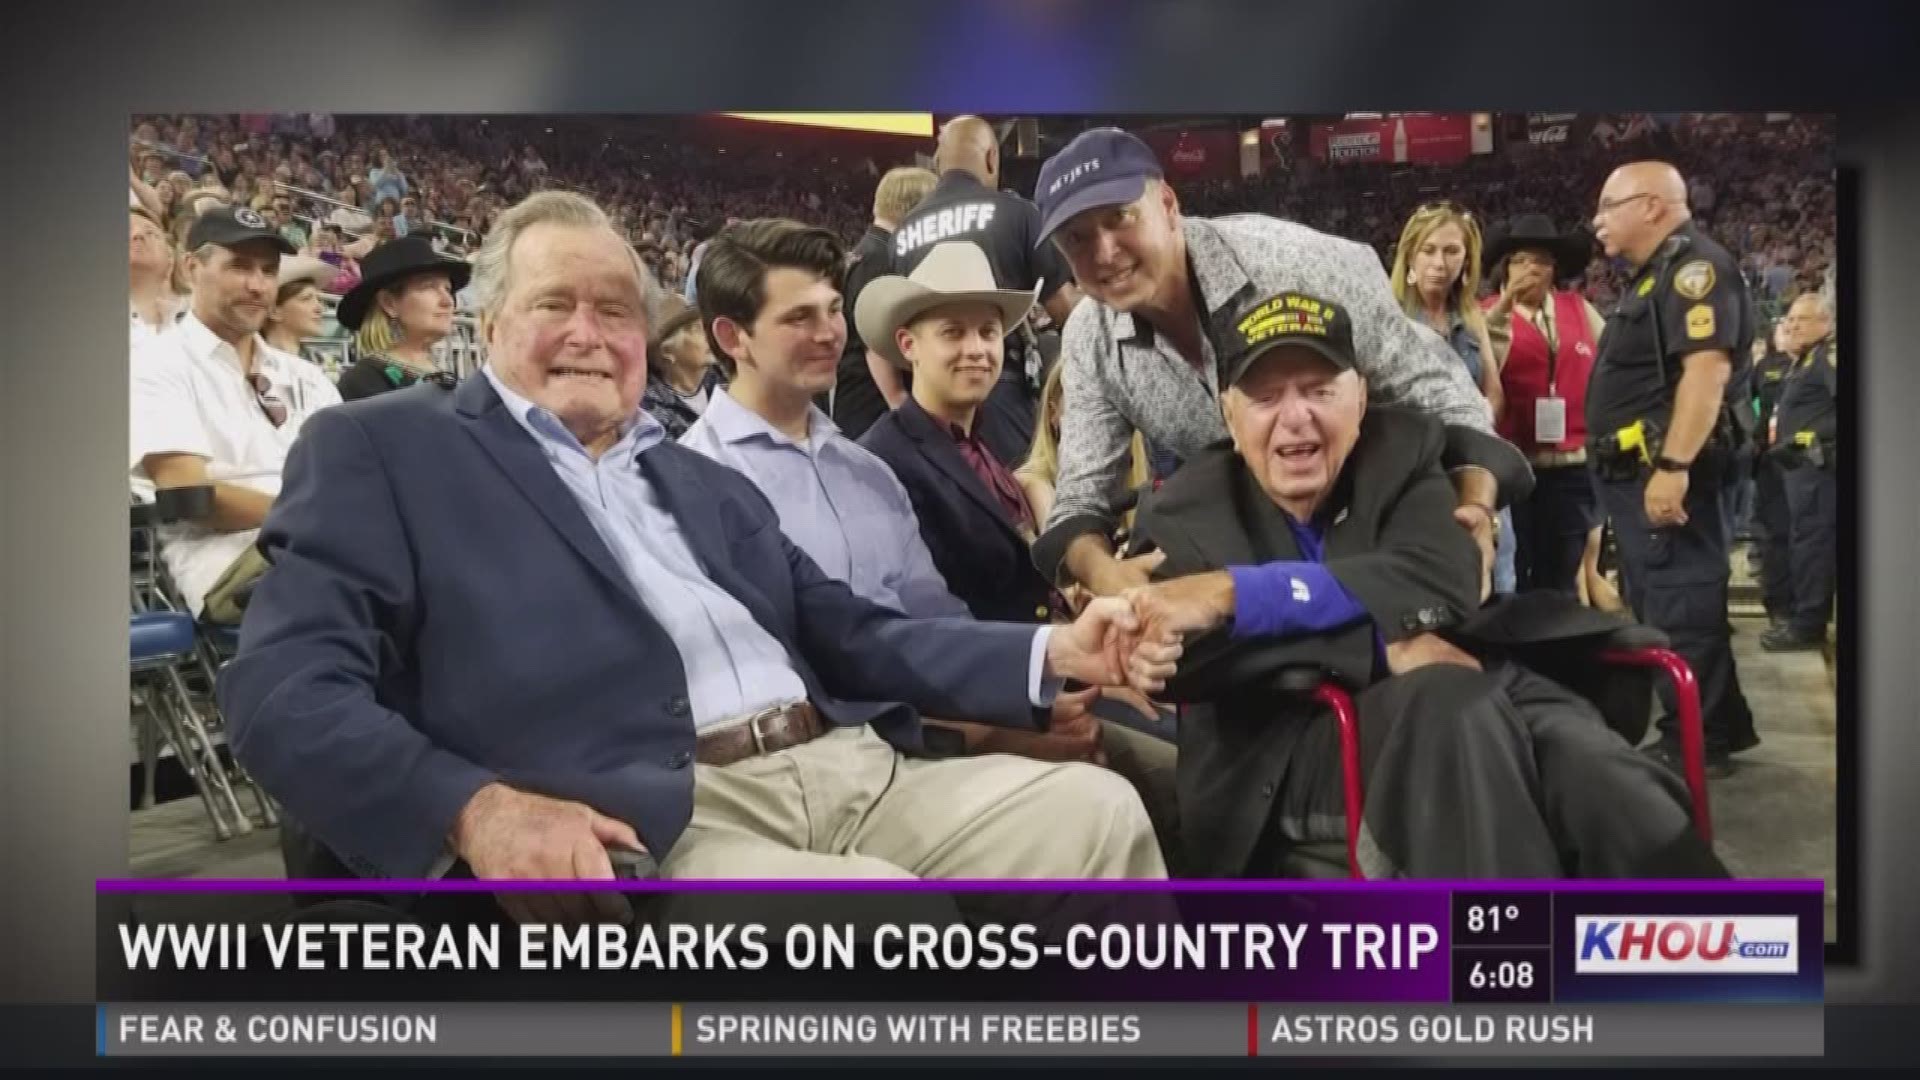 A WWII veteran has embarked on a cross-country trip to visit people in all 50 states in one year and end it on the steps of the White House on his 100th birthday.